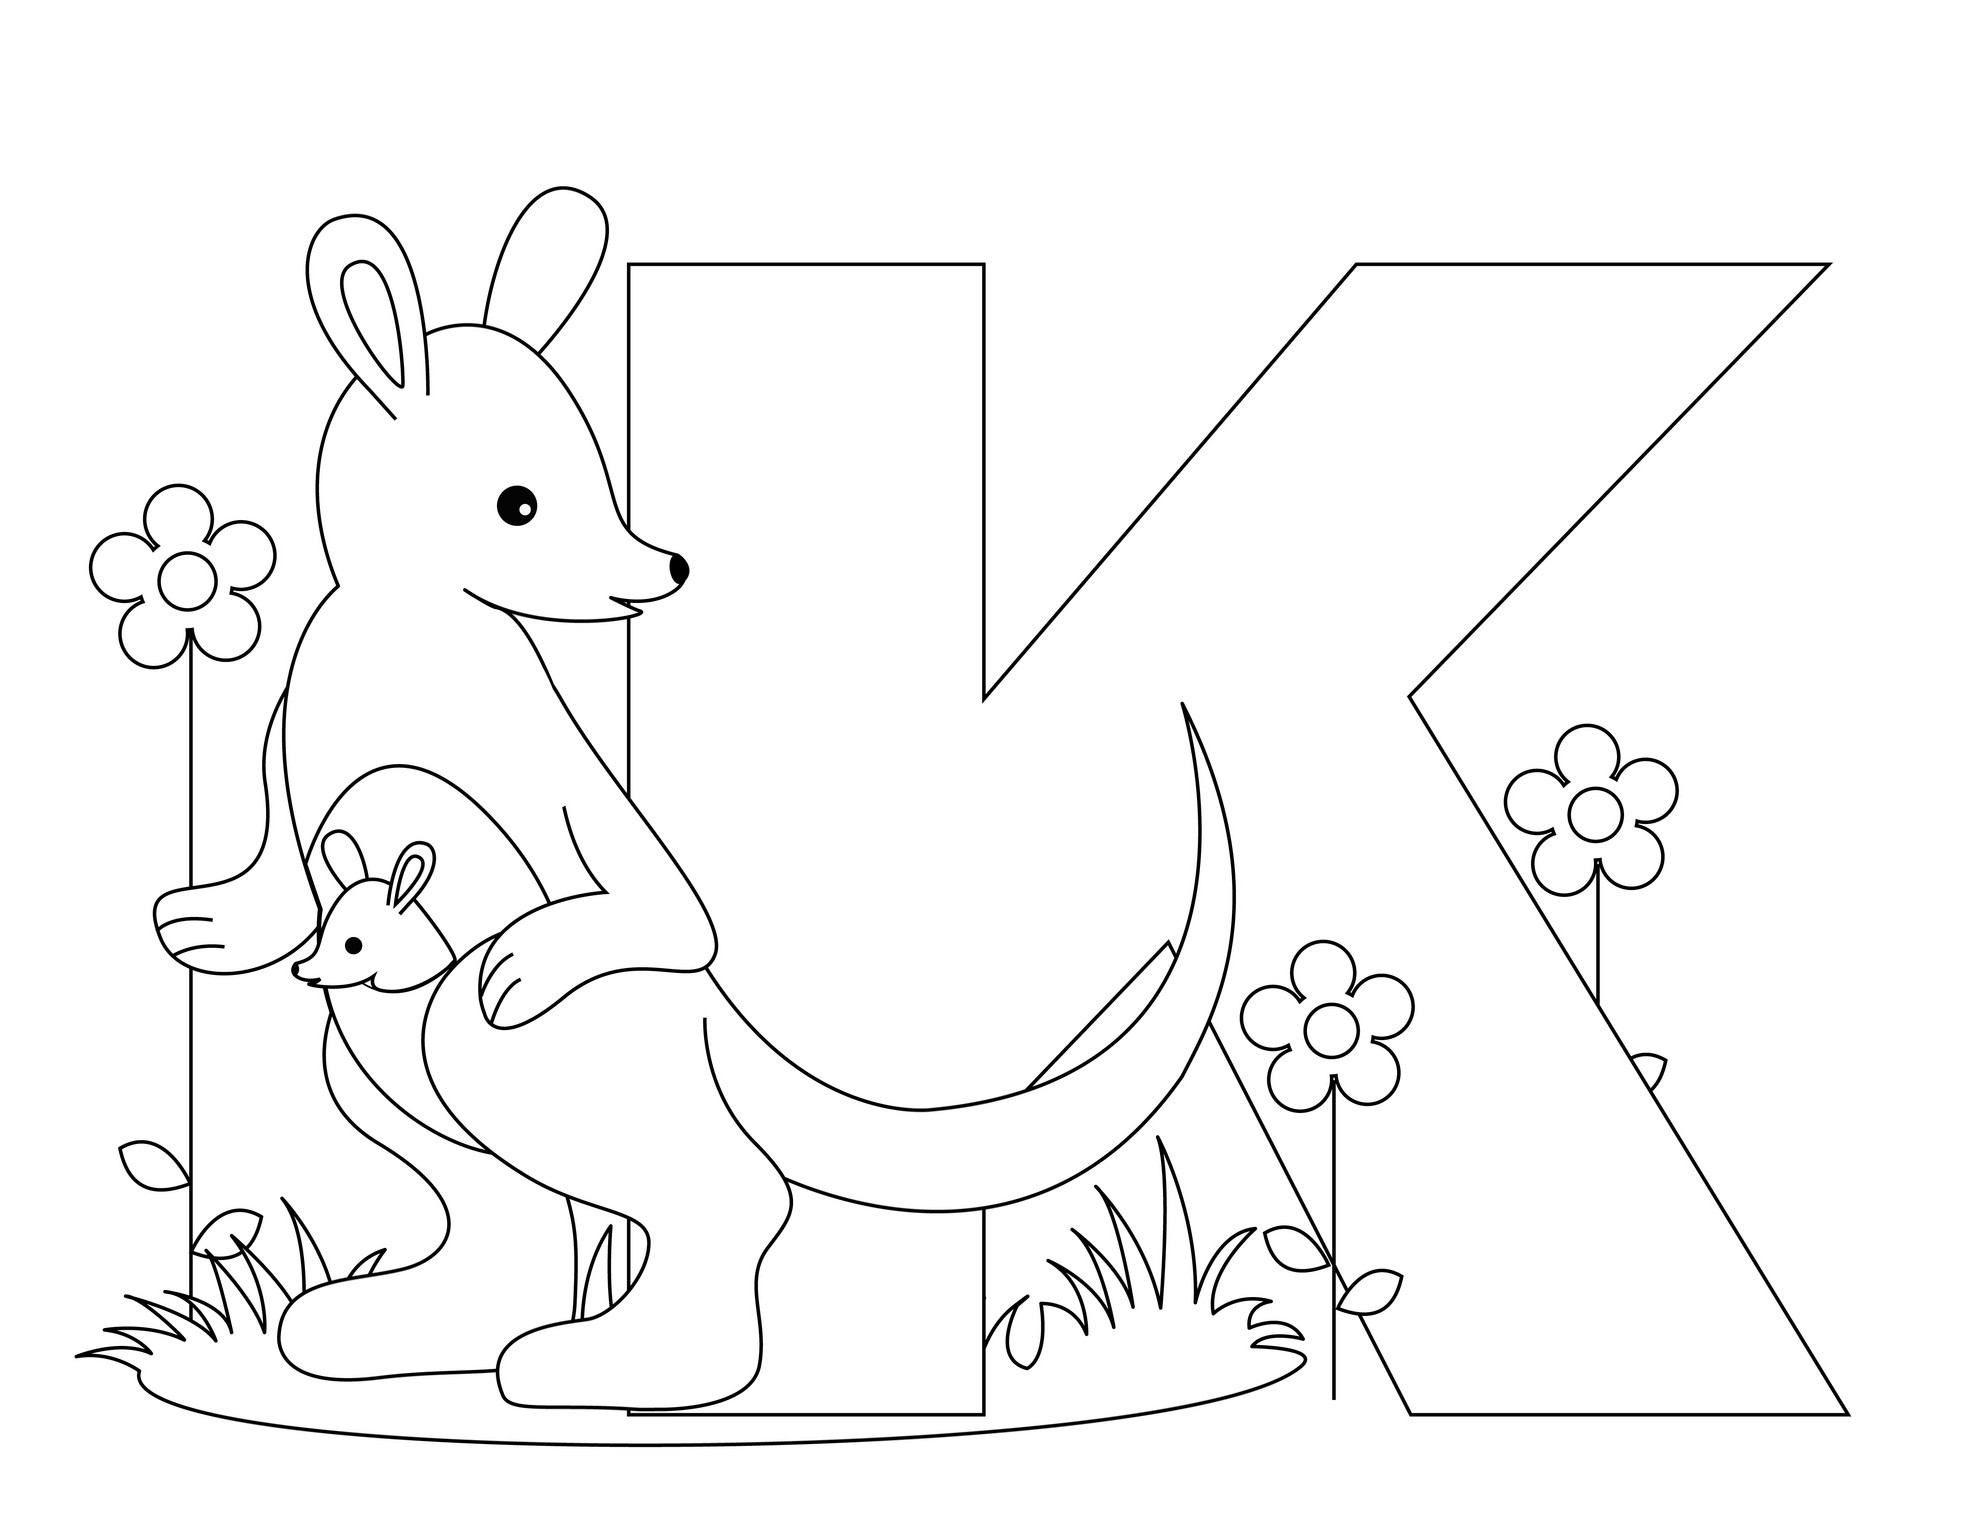 Alphabet Coloring Pages Preschool – With Kindergarten Also Childrens - Free Printable Alphabet Letters Coloring Pages